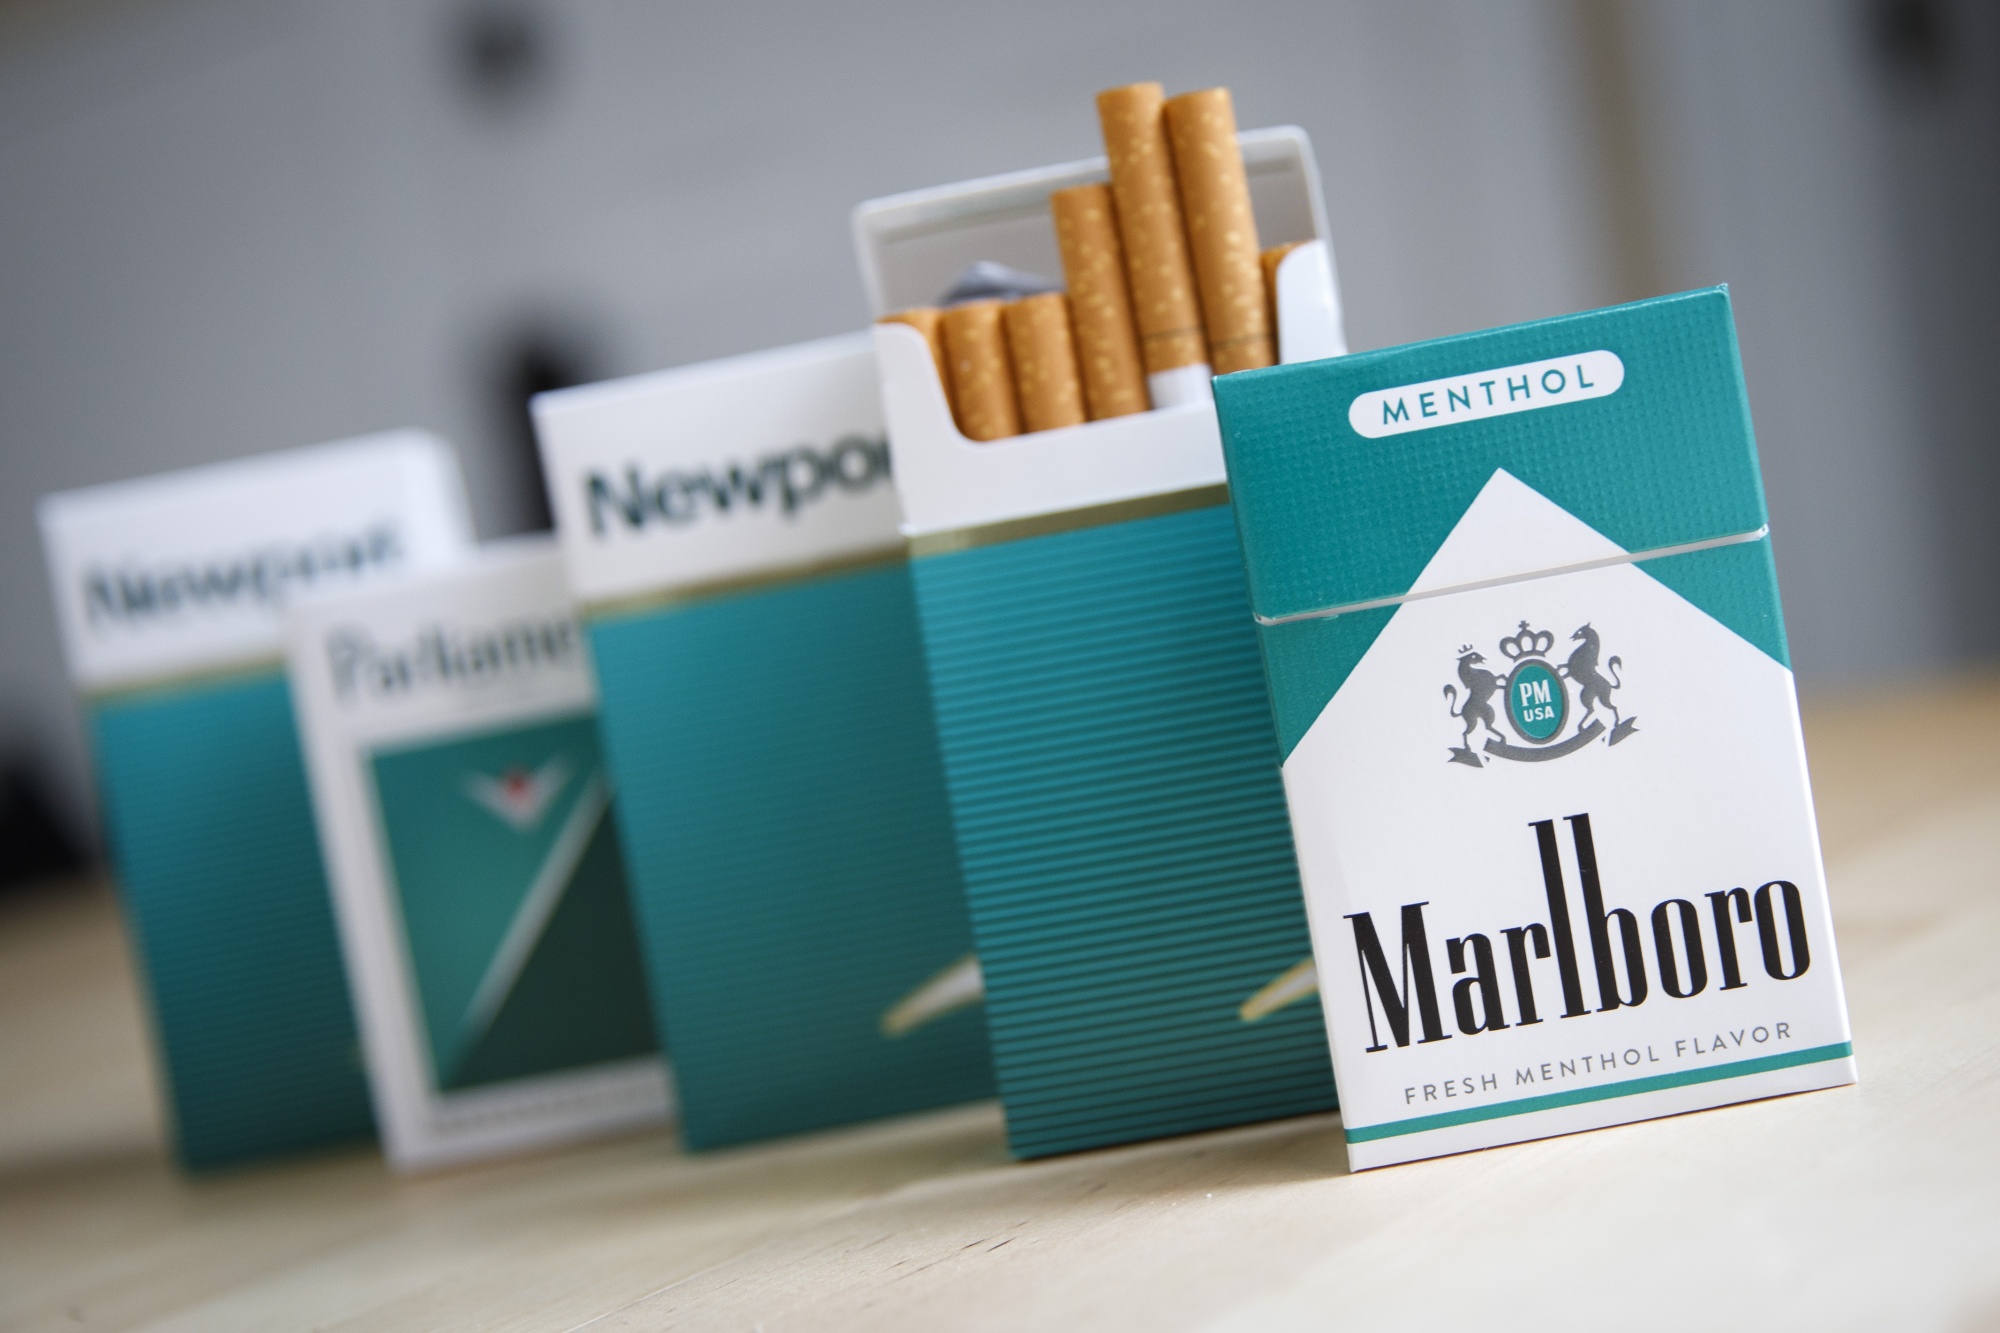 Cigarette-like cigarillo introduced to bypass taxation